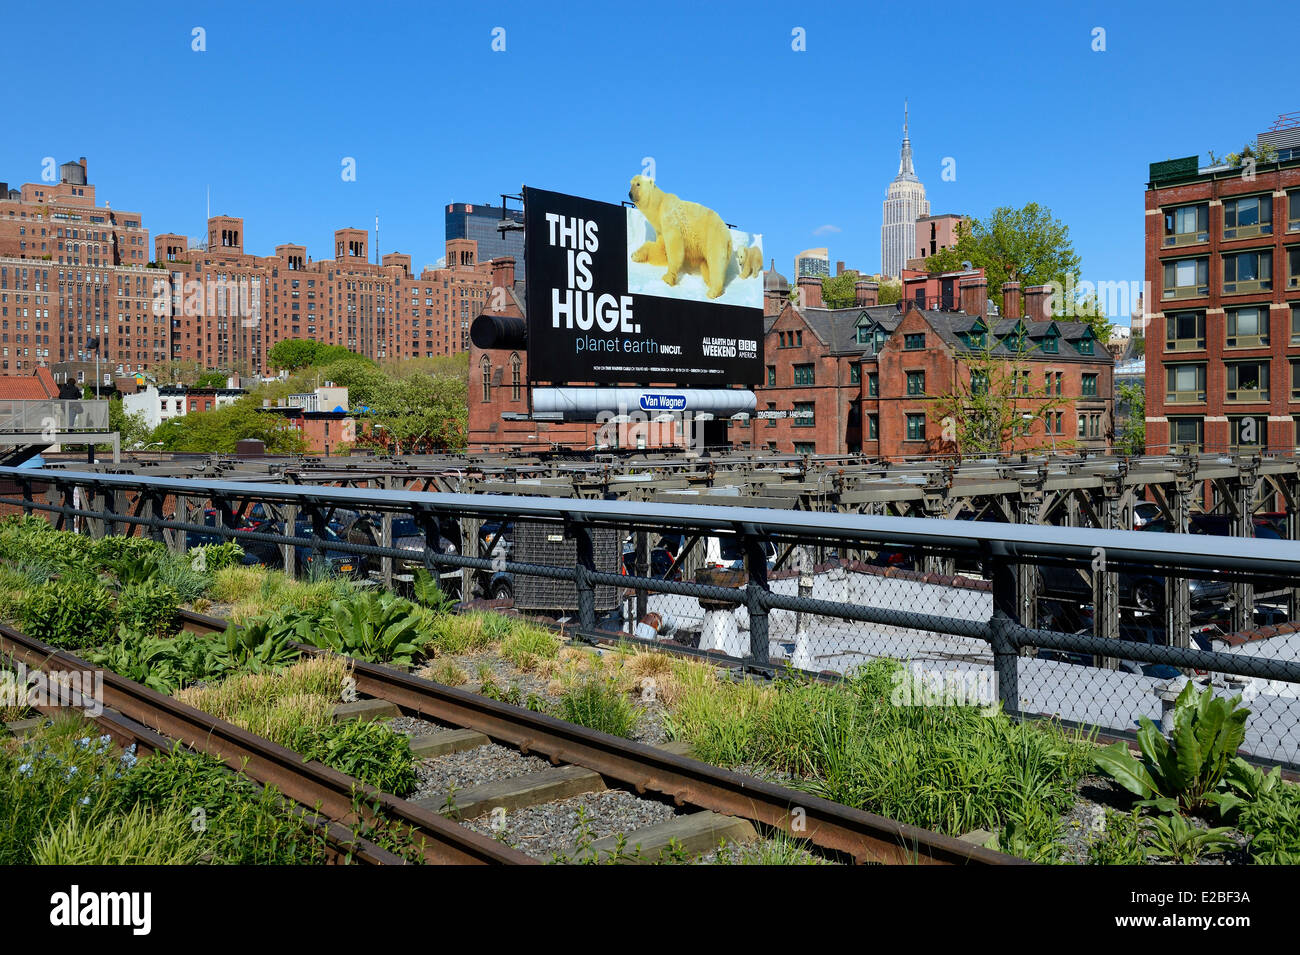 United States, New York City, Manhattan, Meatpacking District (Gansevoort Market), the High Line is a park built on a section of the former elevated freight railroad spur; the Empire State Building in the background Stock Photo